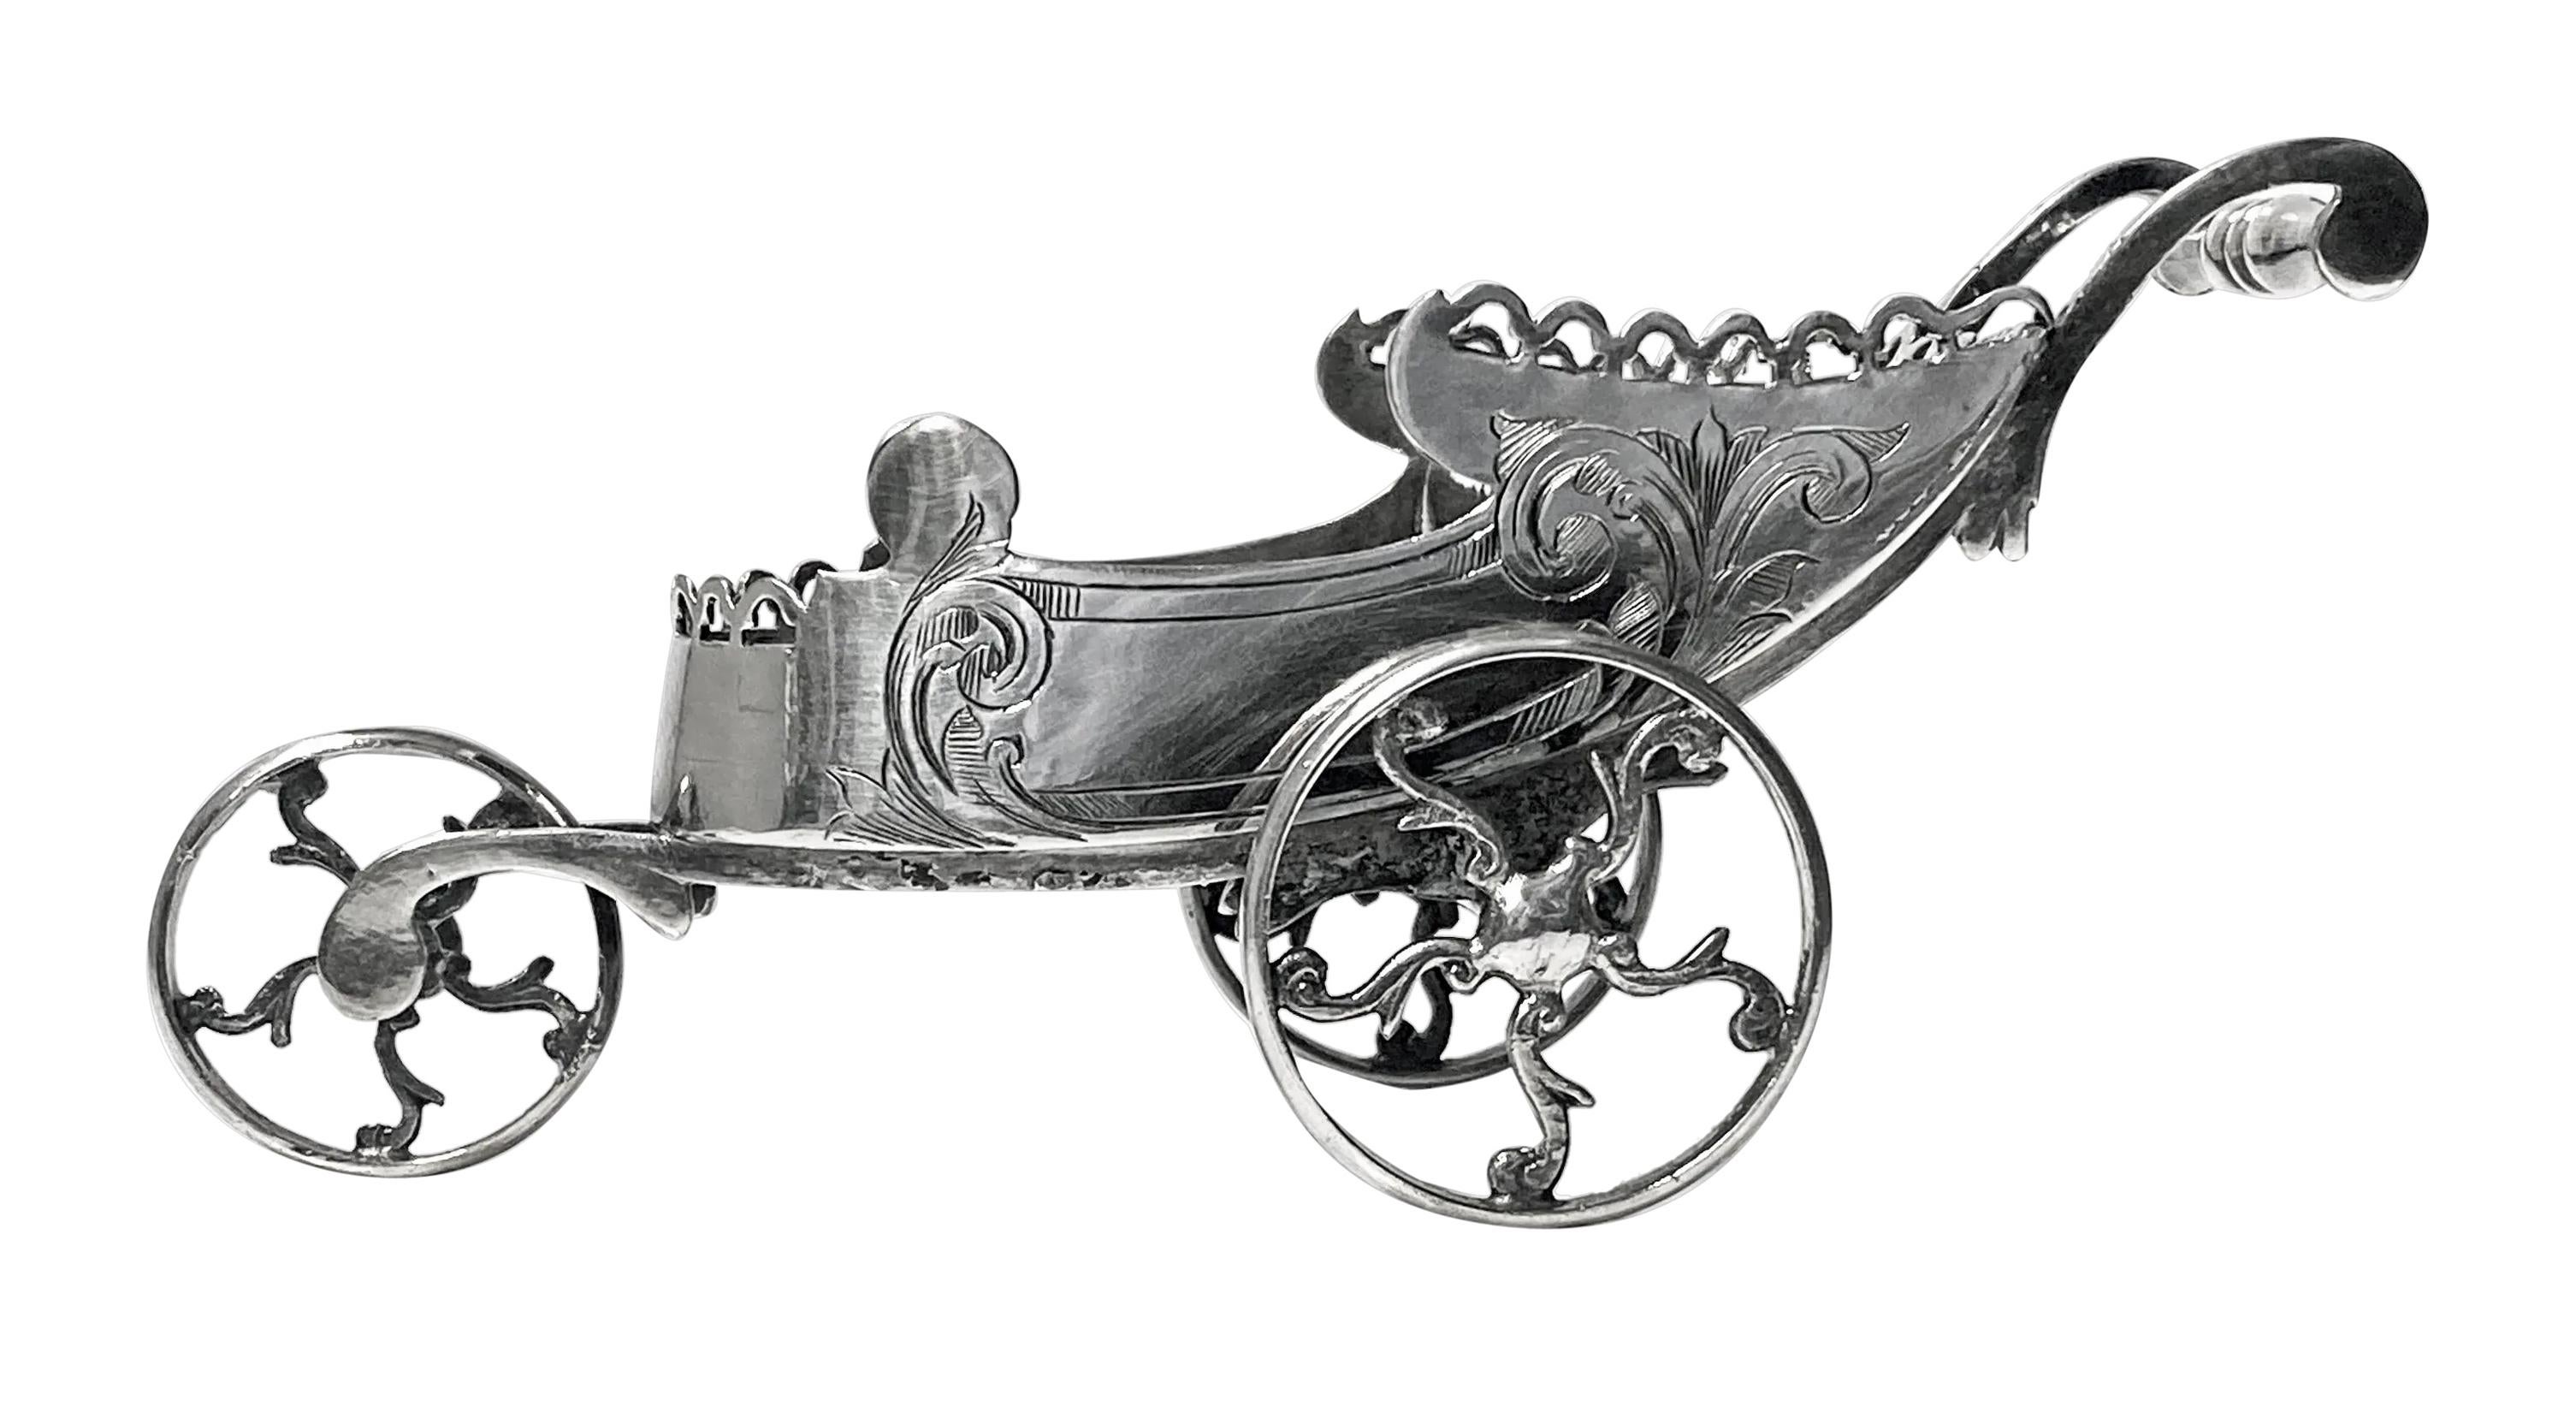 Novelty silver plate Chariot Carriage Continental C.1870. Together with associated spoon could be used for Condiments or small mints etc. Very intricately made with pierced frieze surround and hand engraved decoration. Measures: 6.00 x 2.50 x 2.25